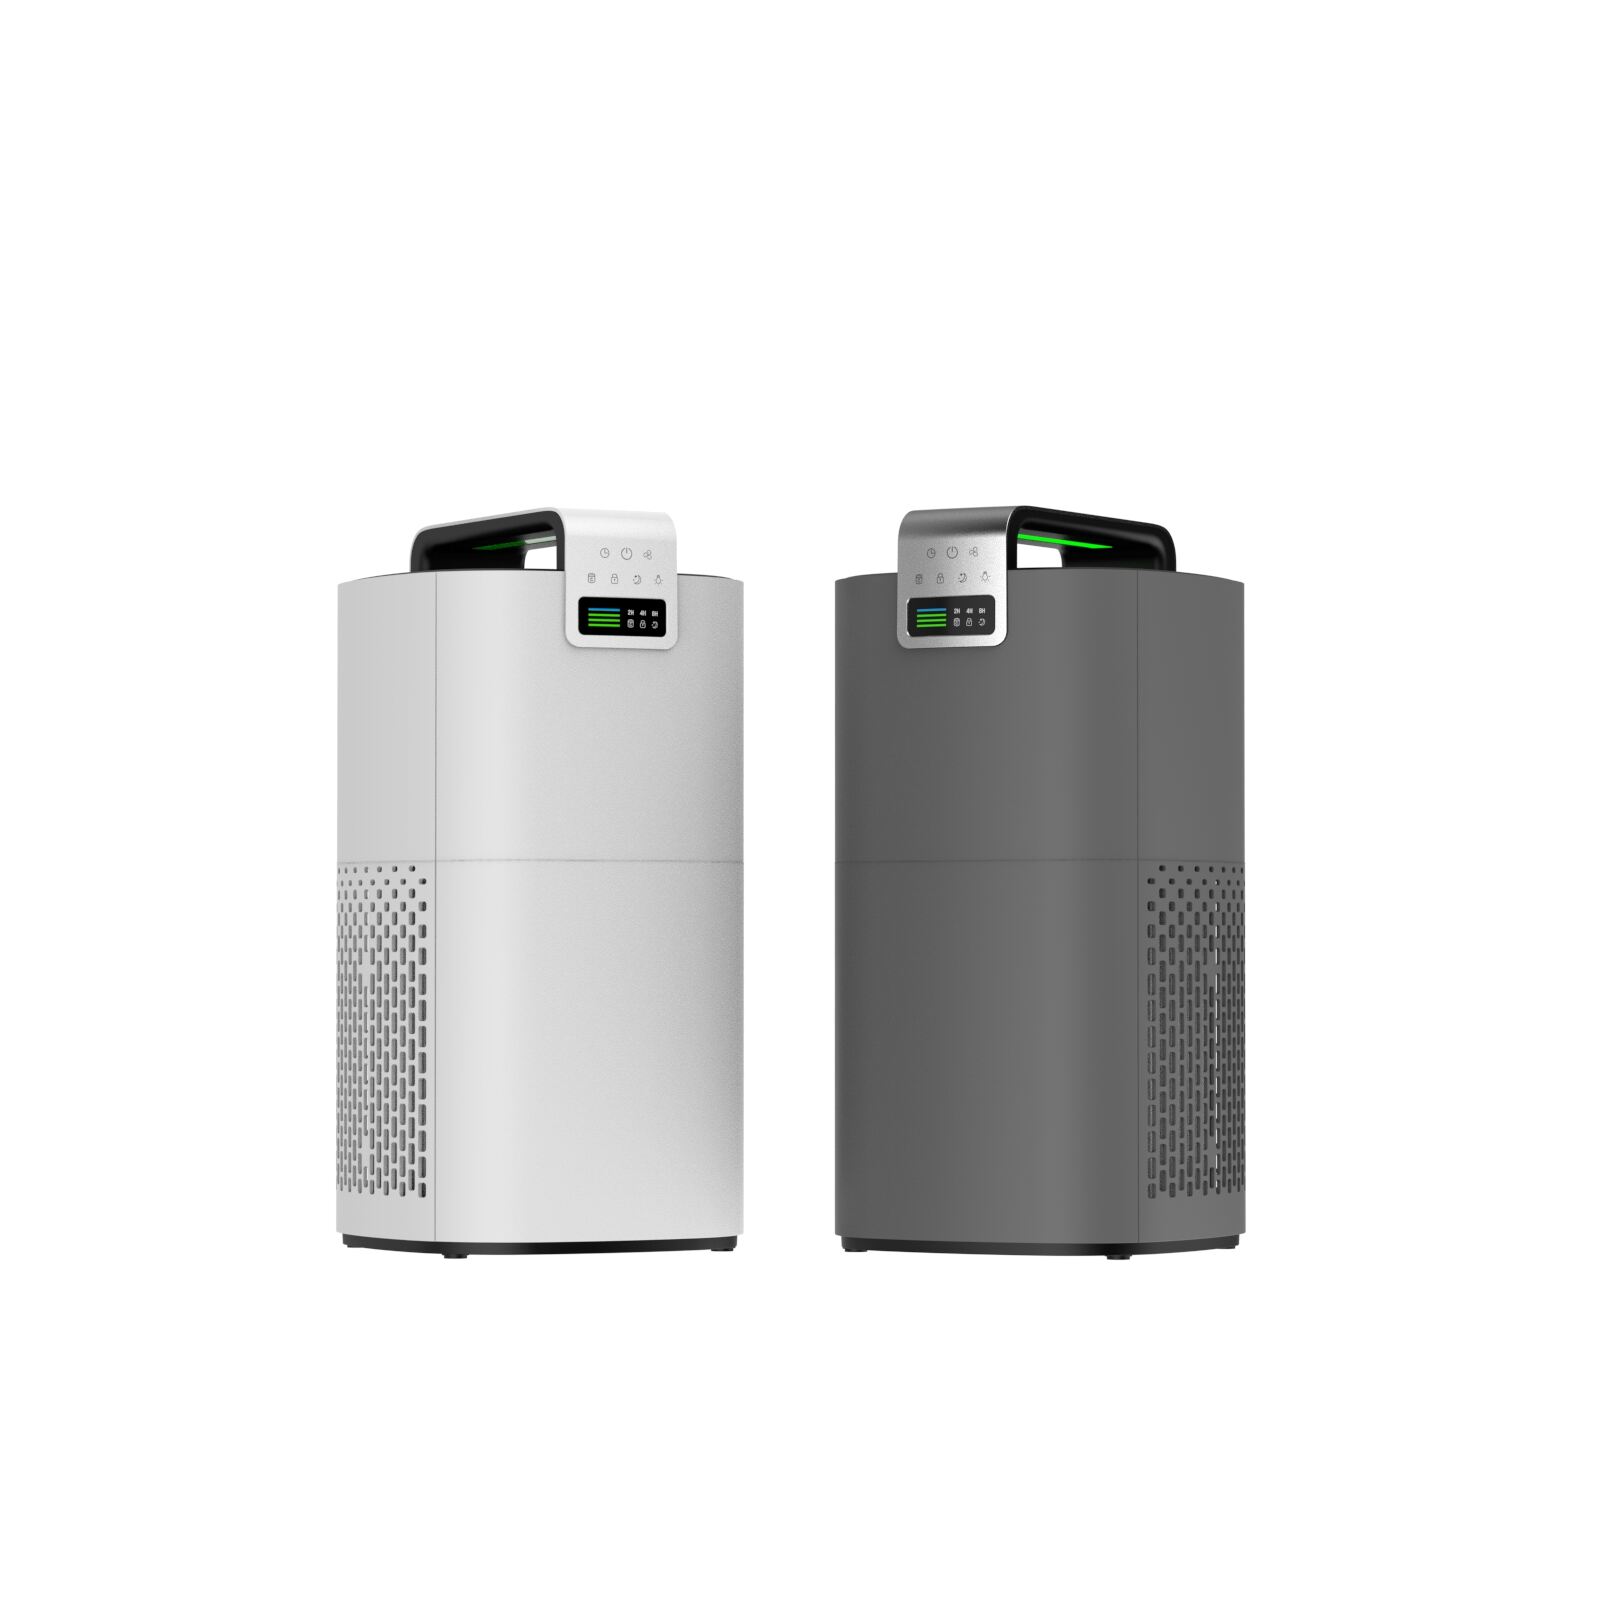 Home 3-in-1 HEPA Filter Air Purifier with Aromatherapy